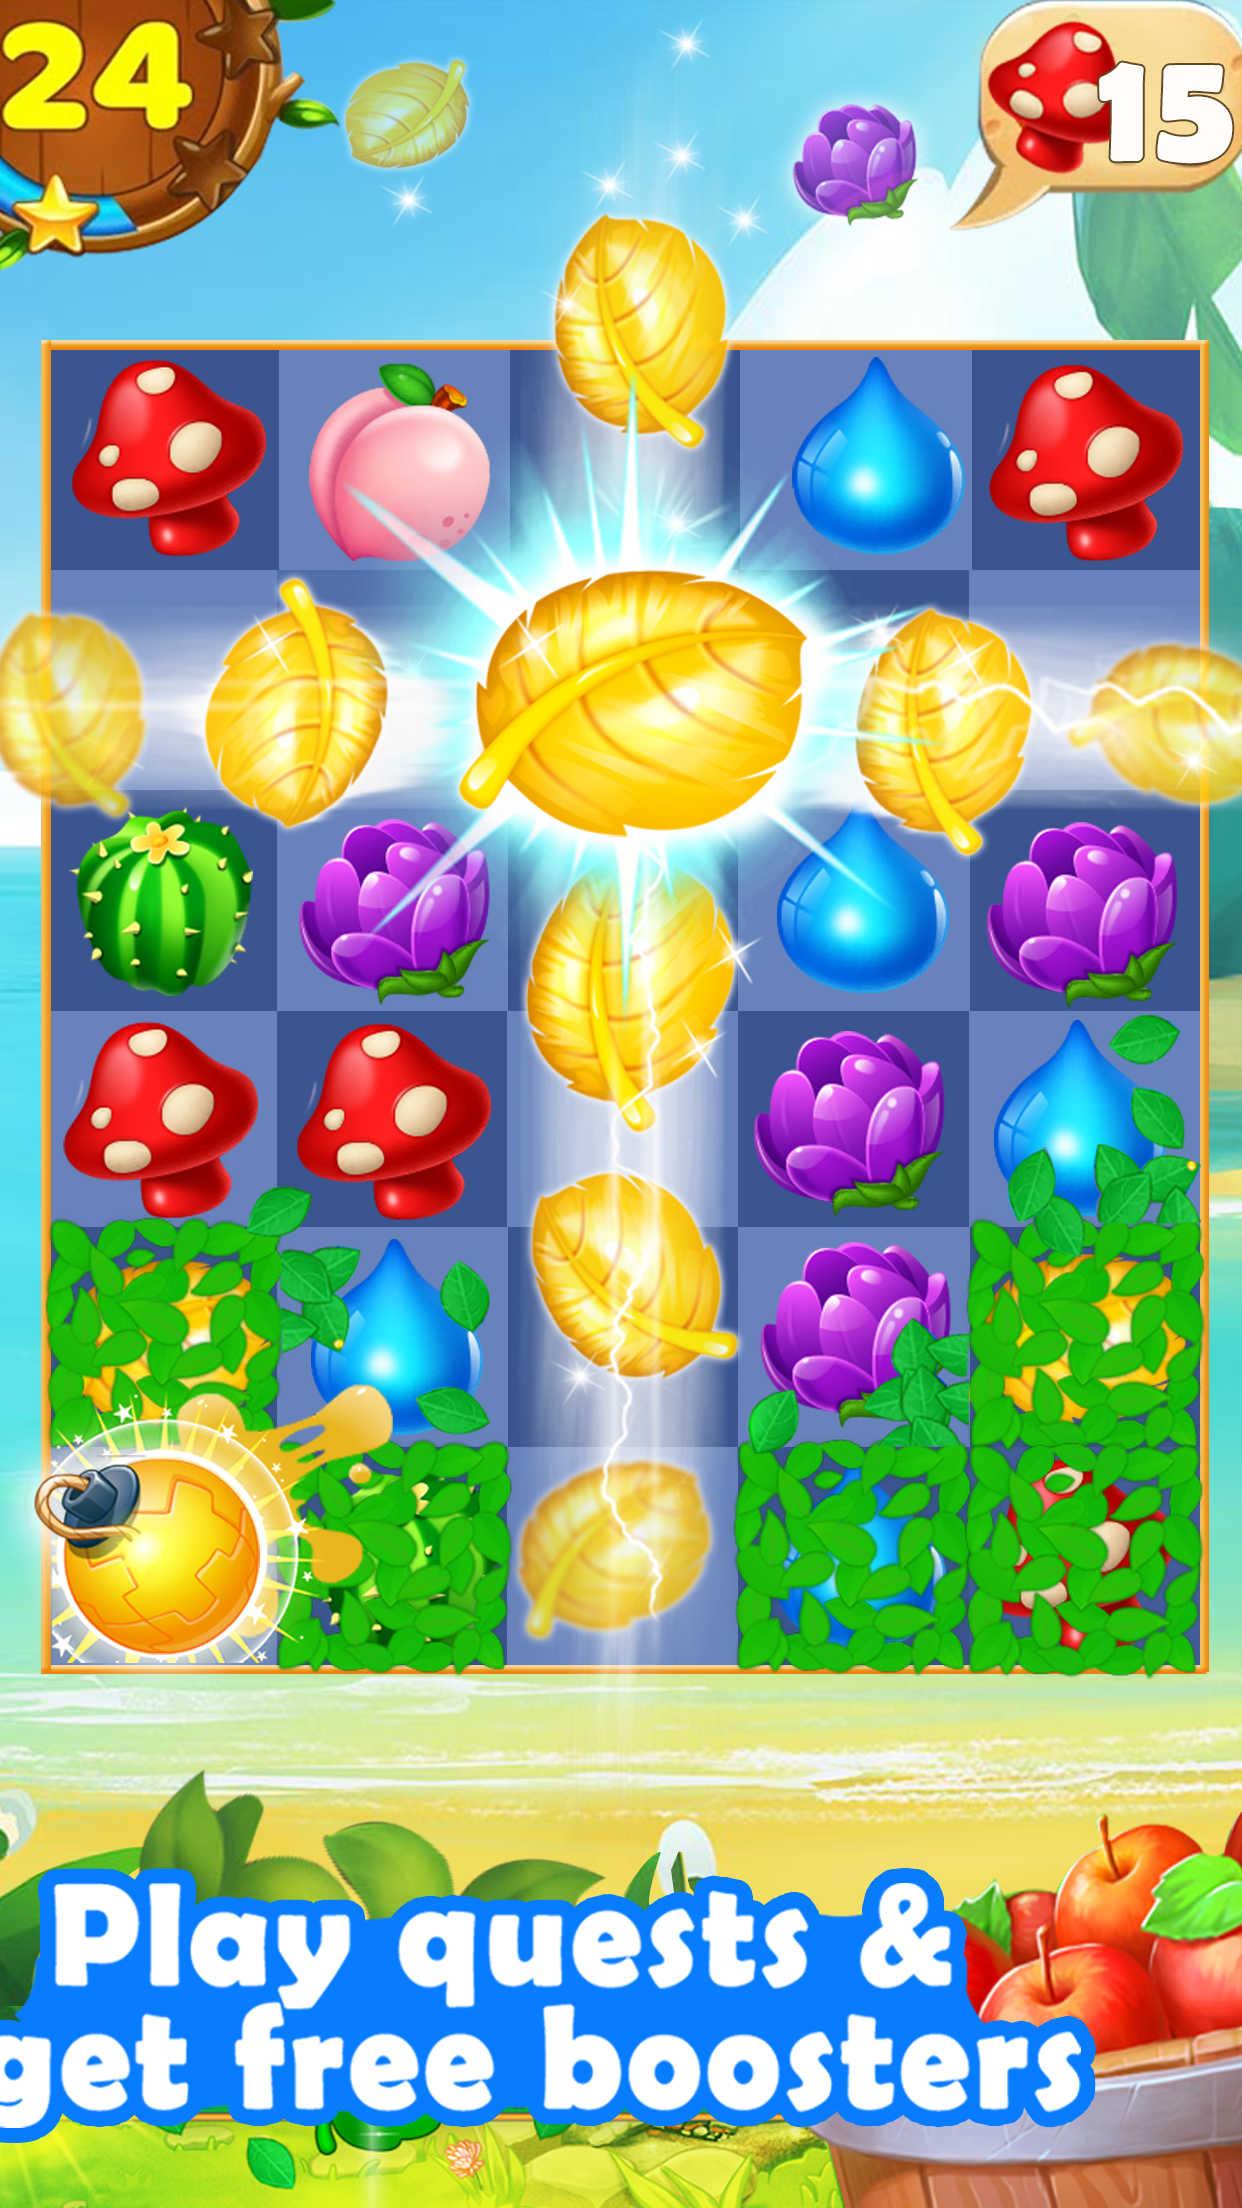 download the last version for windows Balloon Paradise - Match 3 Puzzle Game